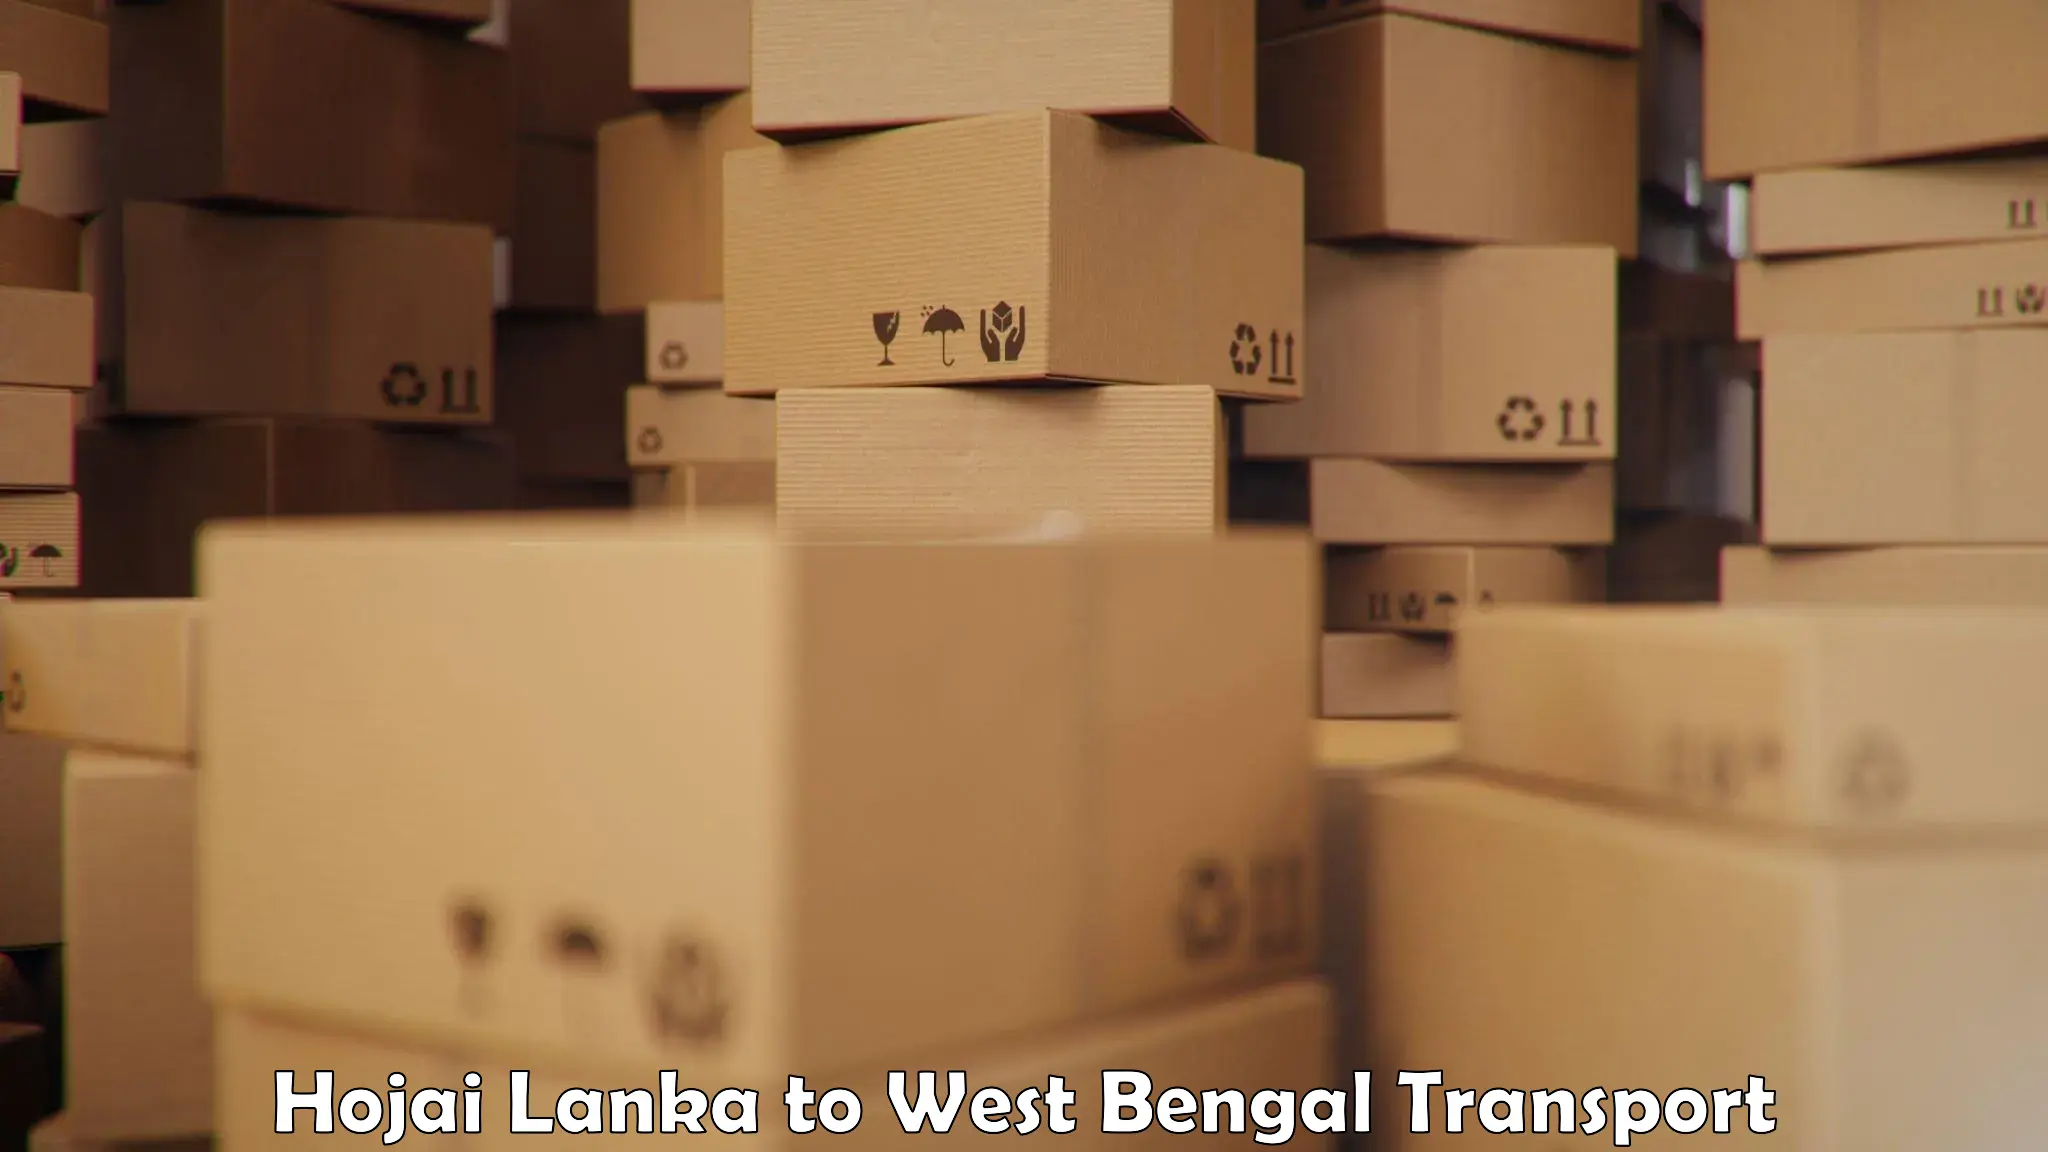 Daily parcel service transport Hojai Lanka to West Bengal